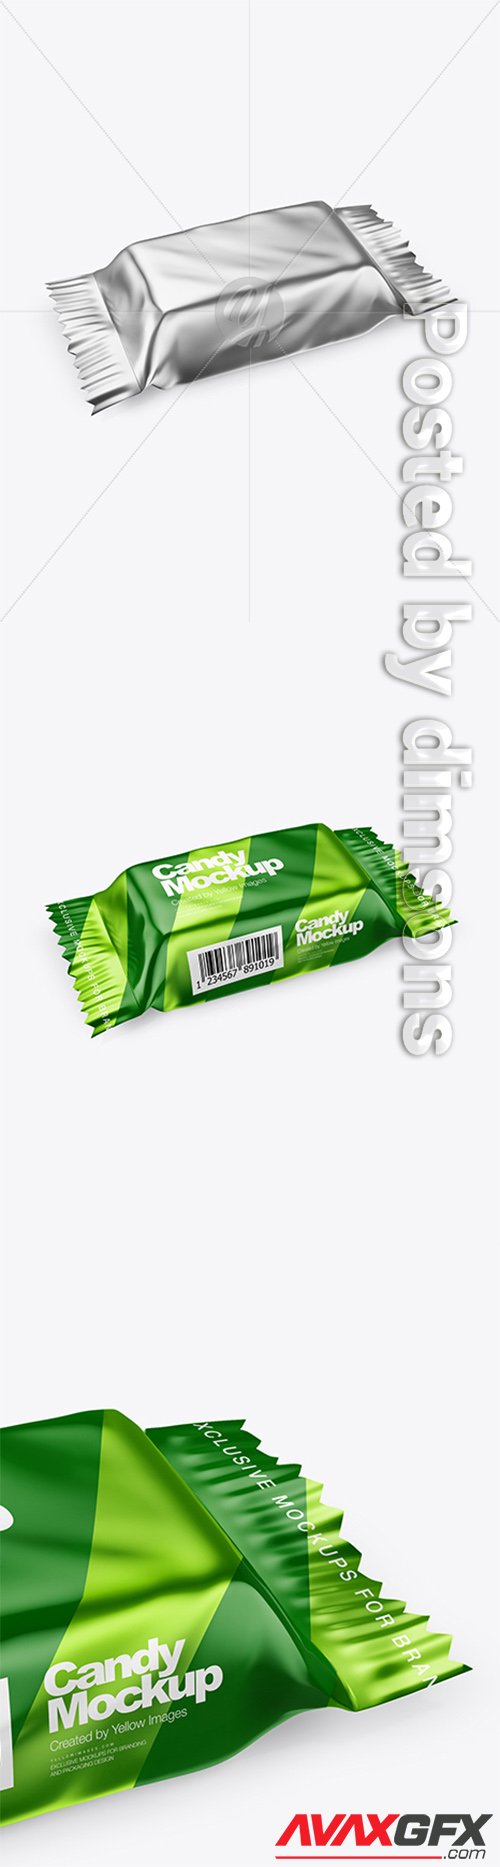 Metallic Candy Package Mockup - Half Side View 30122